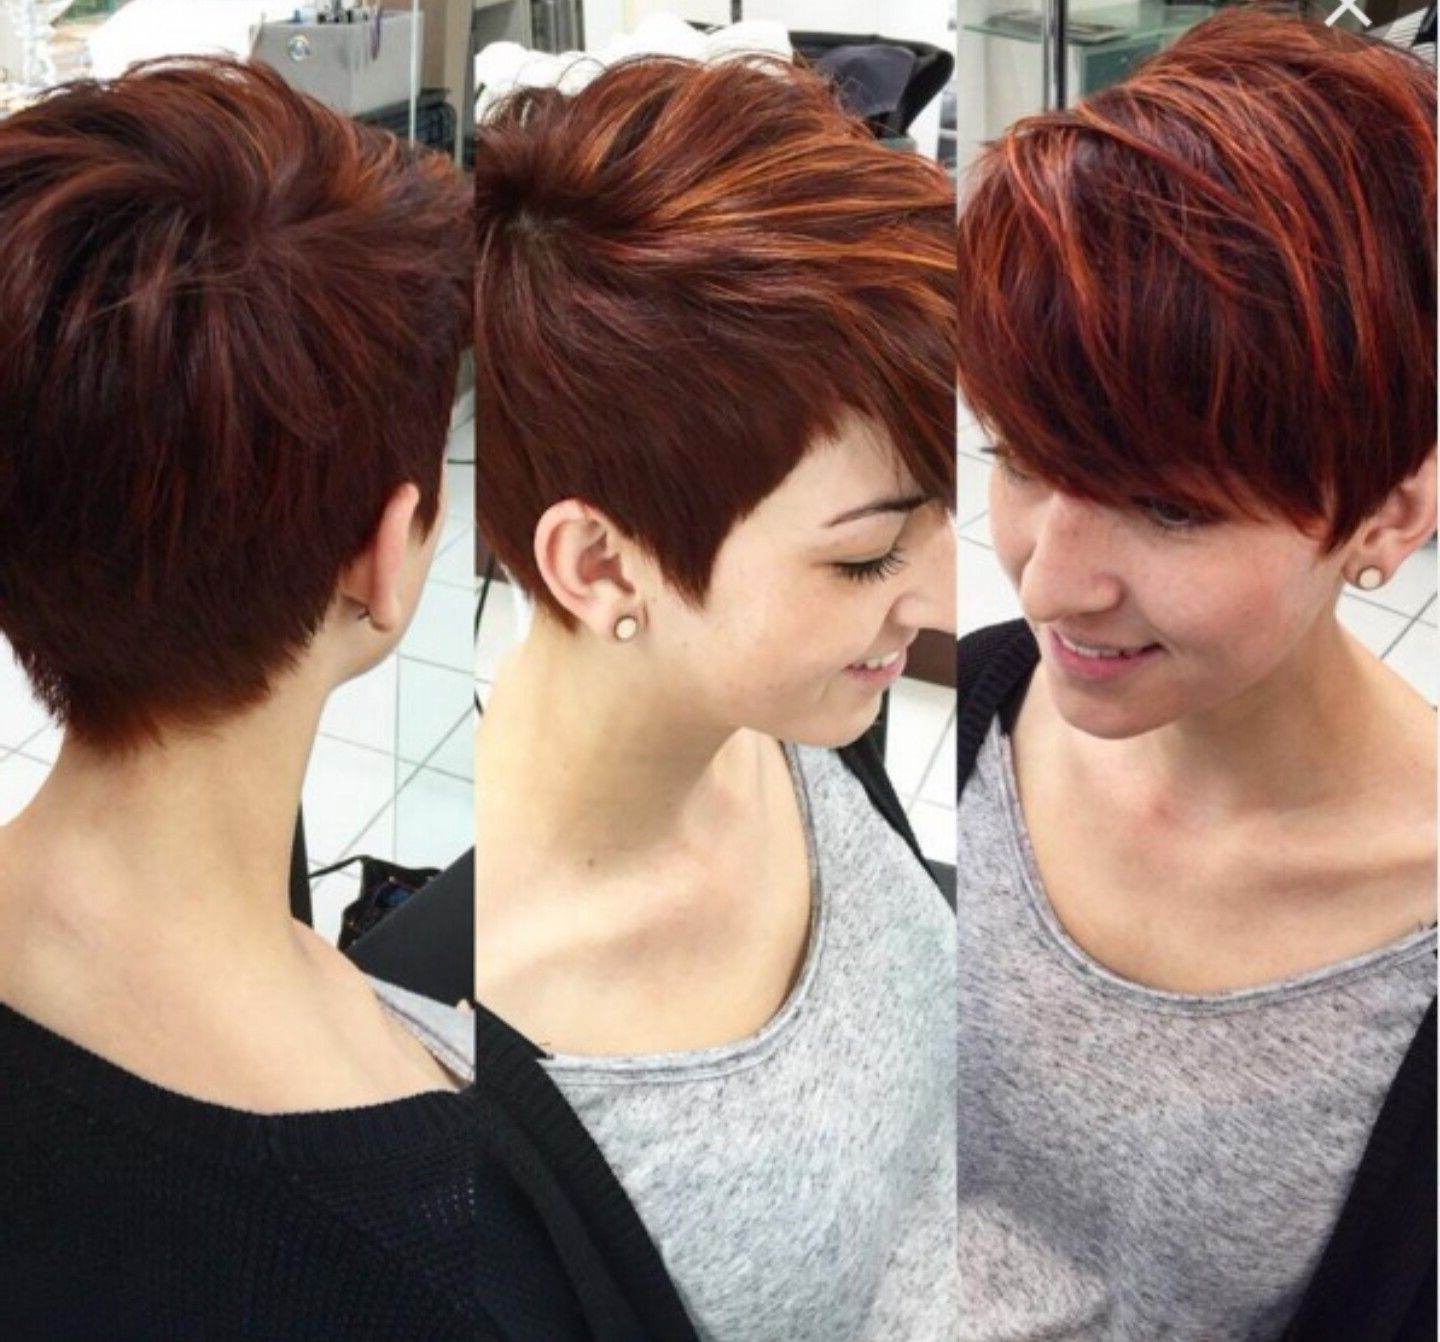 Caramel Colored Pixie With Long Side Bangs | Hair | Pinterest In Recent Long Pixie Hairstyles (View 8 of 15)